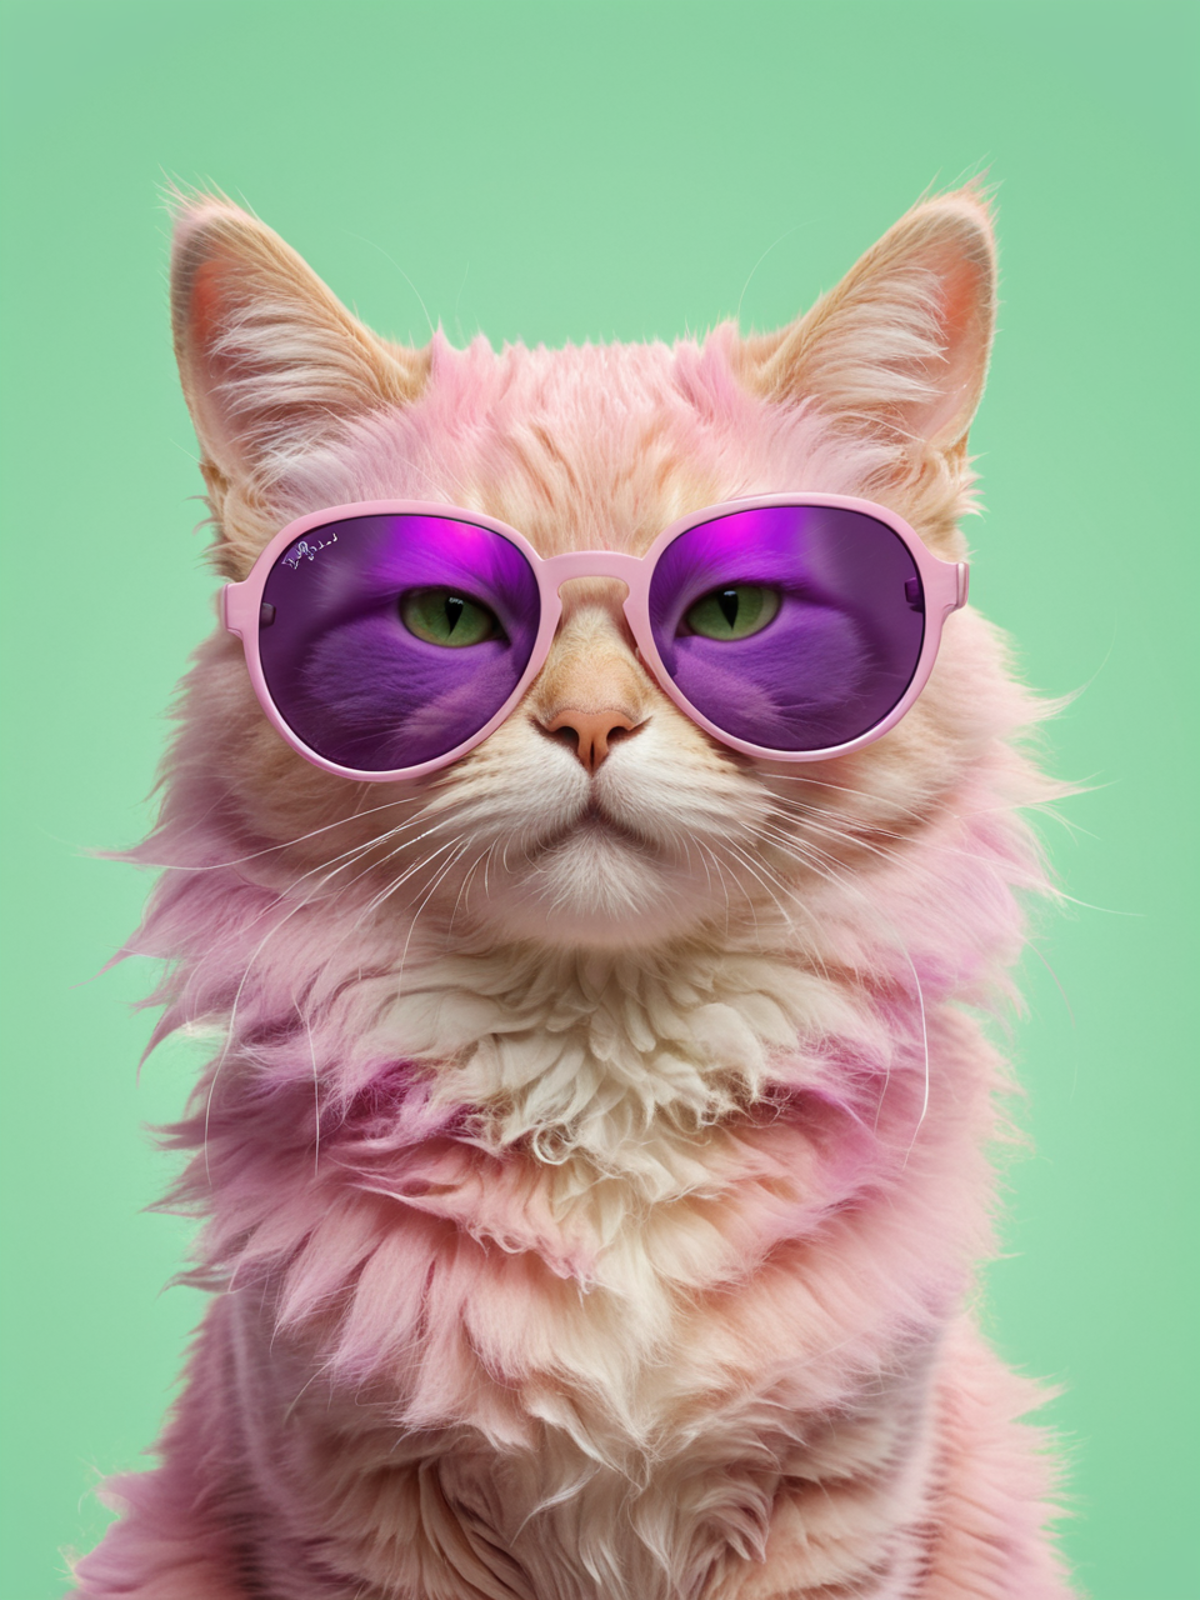 Portrait of a cute fluffy pink cat wearing large sunglasses, colorful, center image, clean borders, symmetry, symmetrica, ...